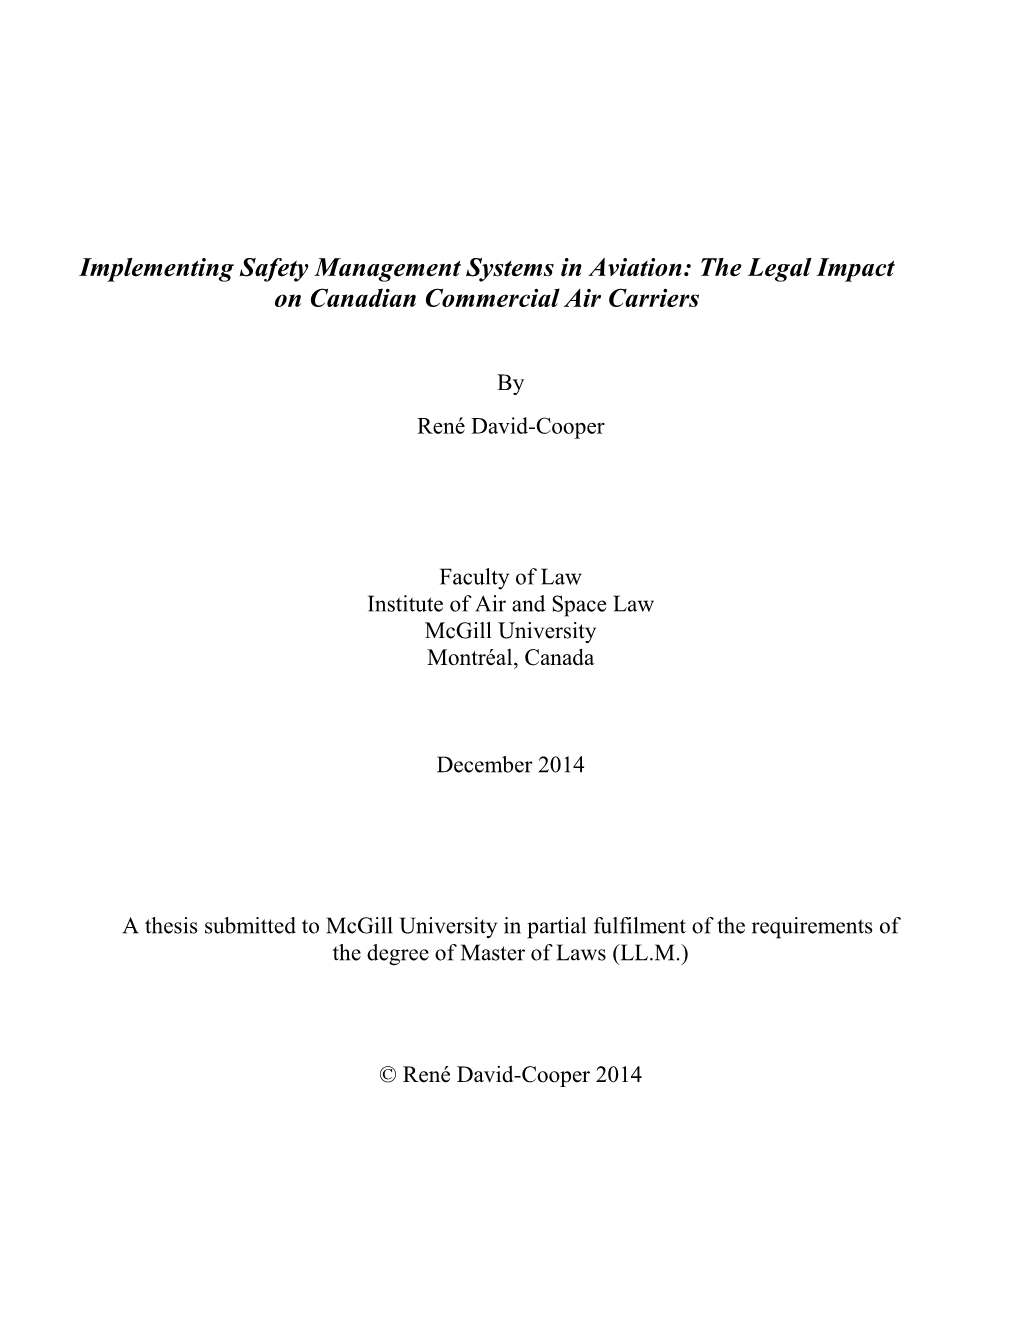 Implementing Safety Management Systems in Aviation: the Legal Impact on Canadian Commercial Air Carriers